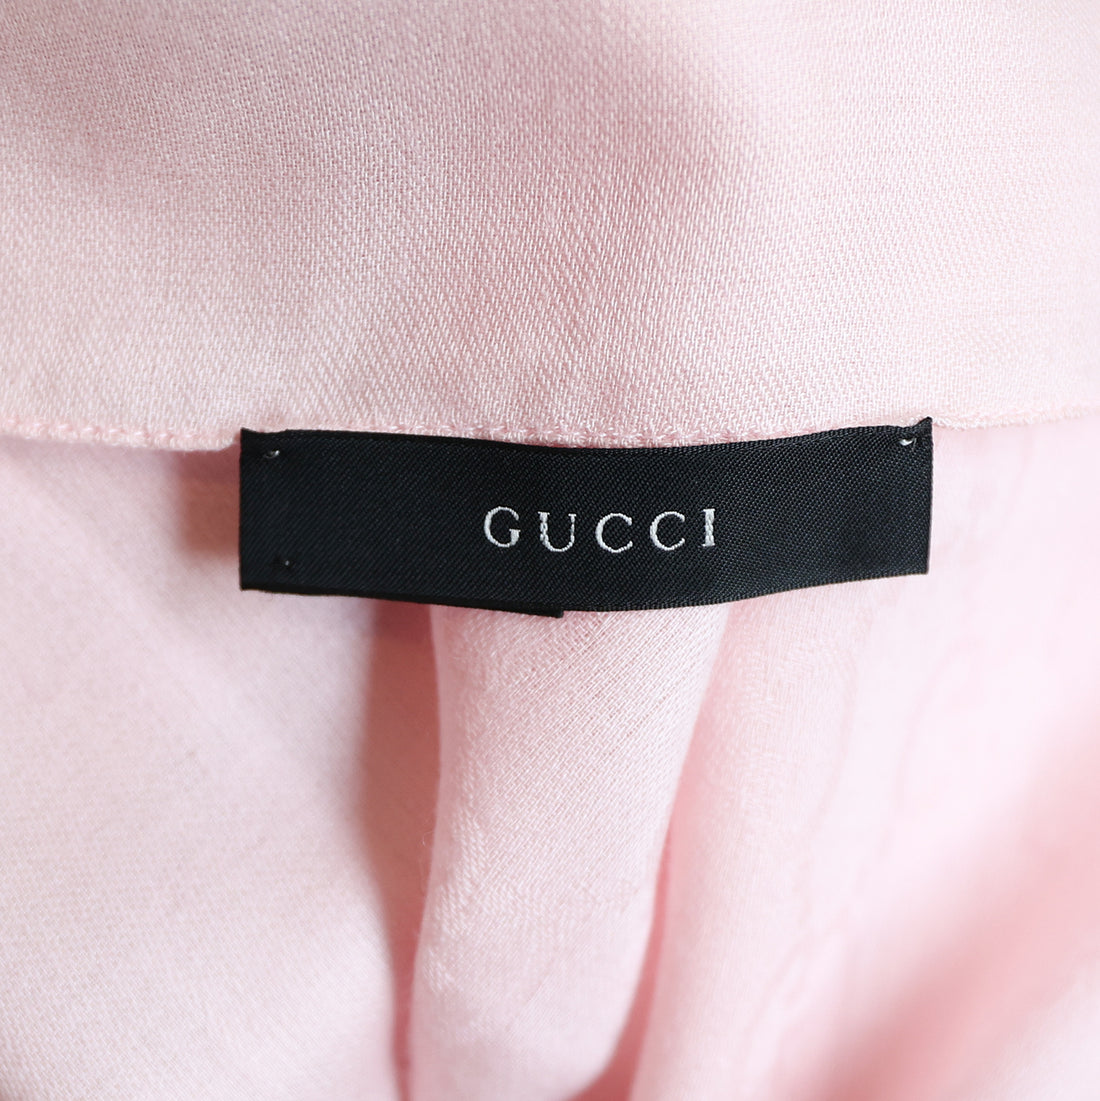 Gucci scarf with GG logo print